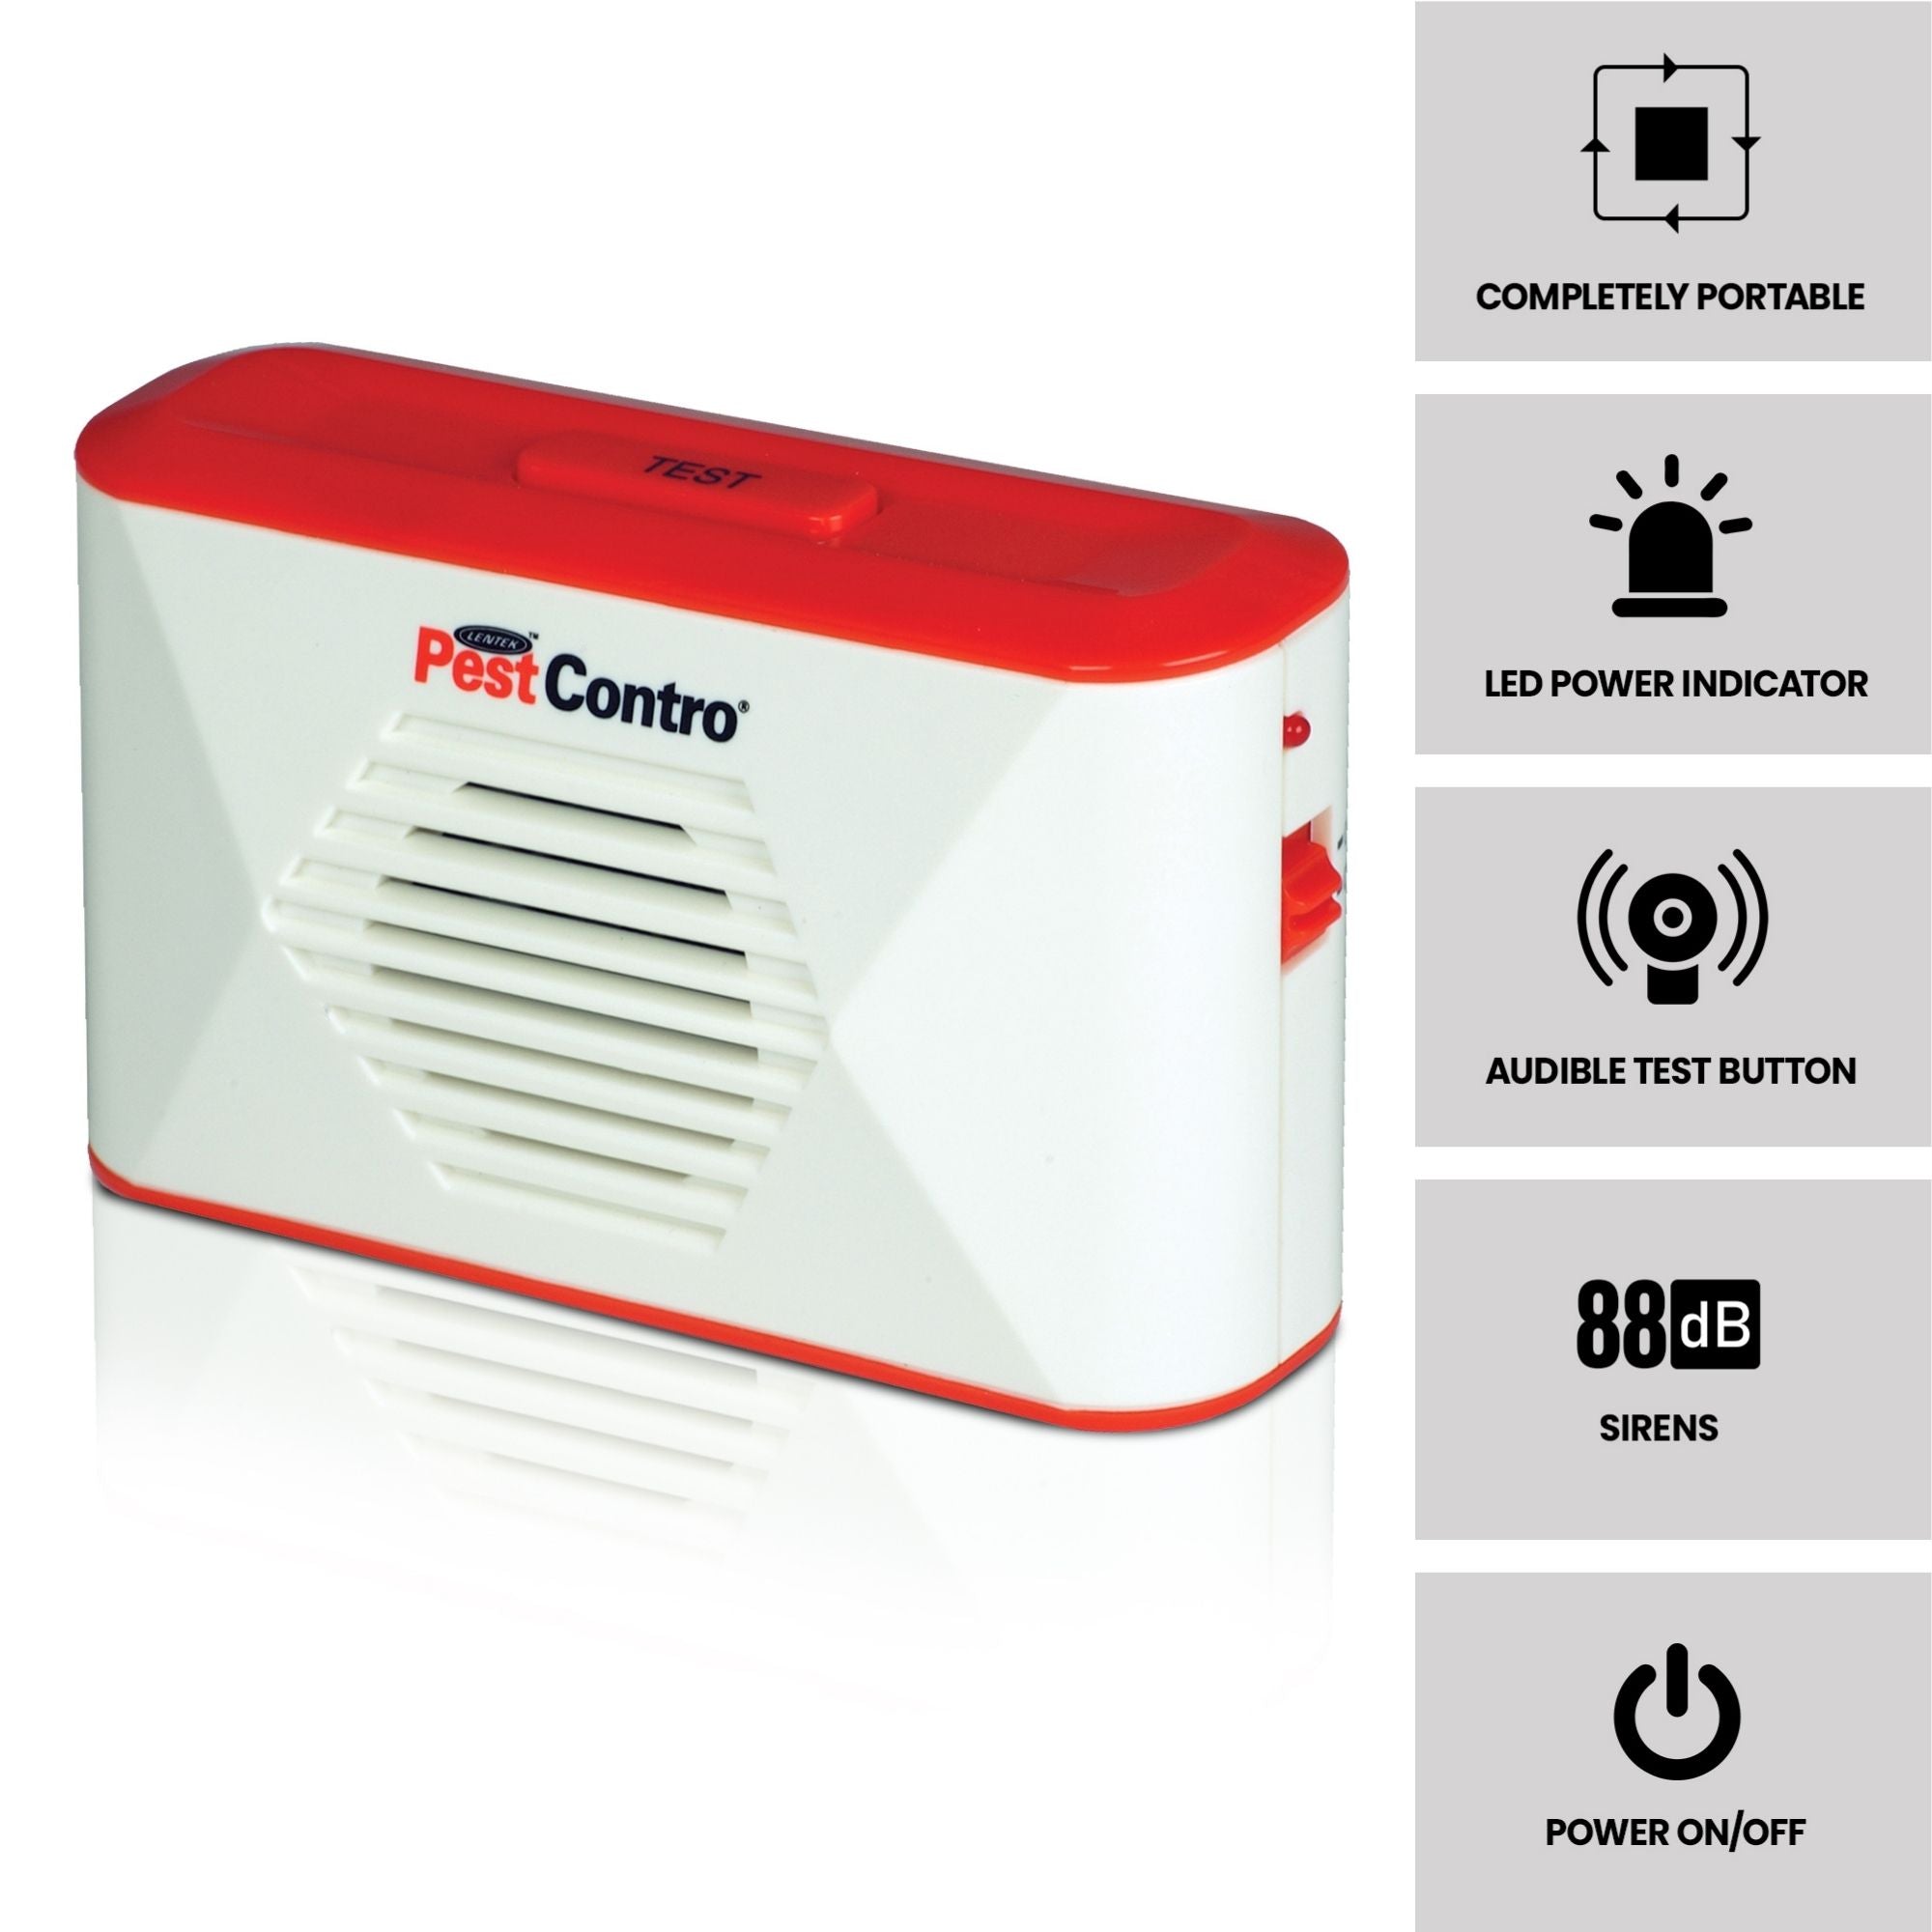 Product shot of PestContro portable ultrasonic rodent repeller on a white background with text and icons to the right describing: Completely portable; LED power indicator; audible test button; 88dB sirens; power on/off